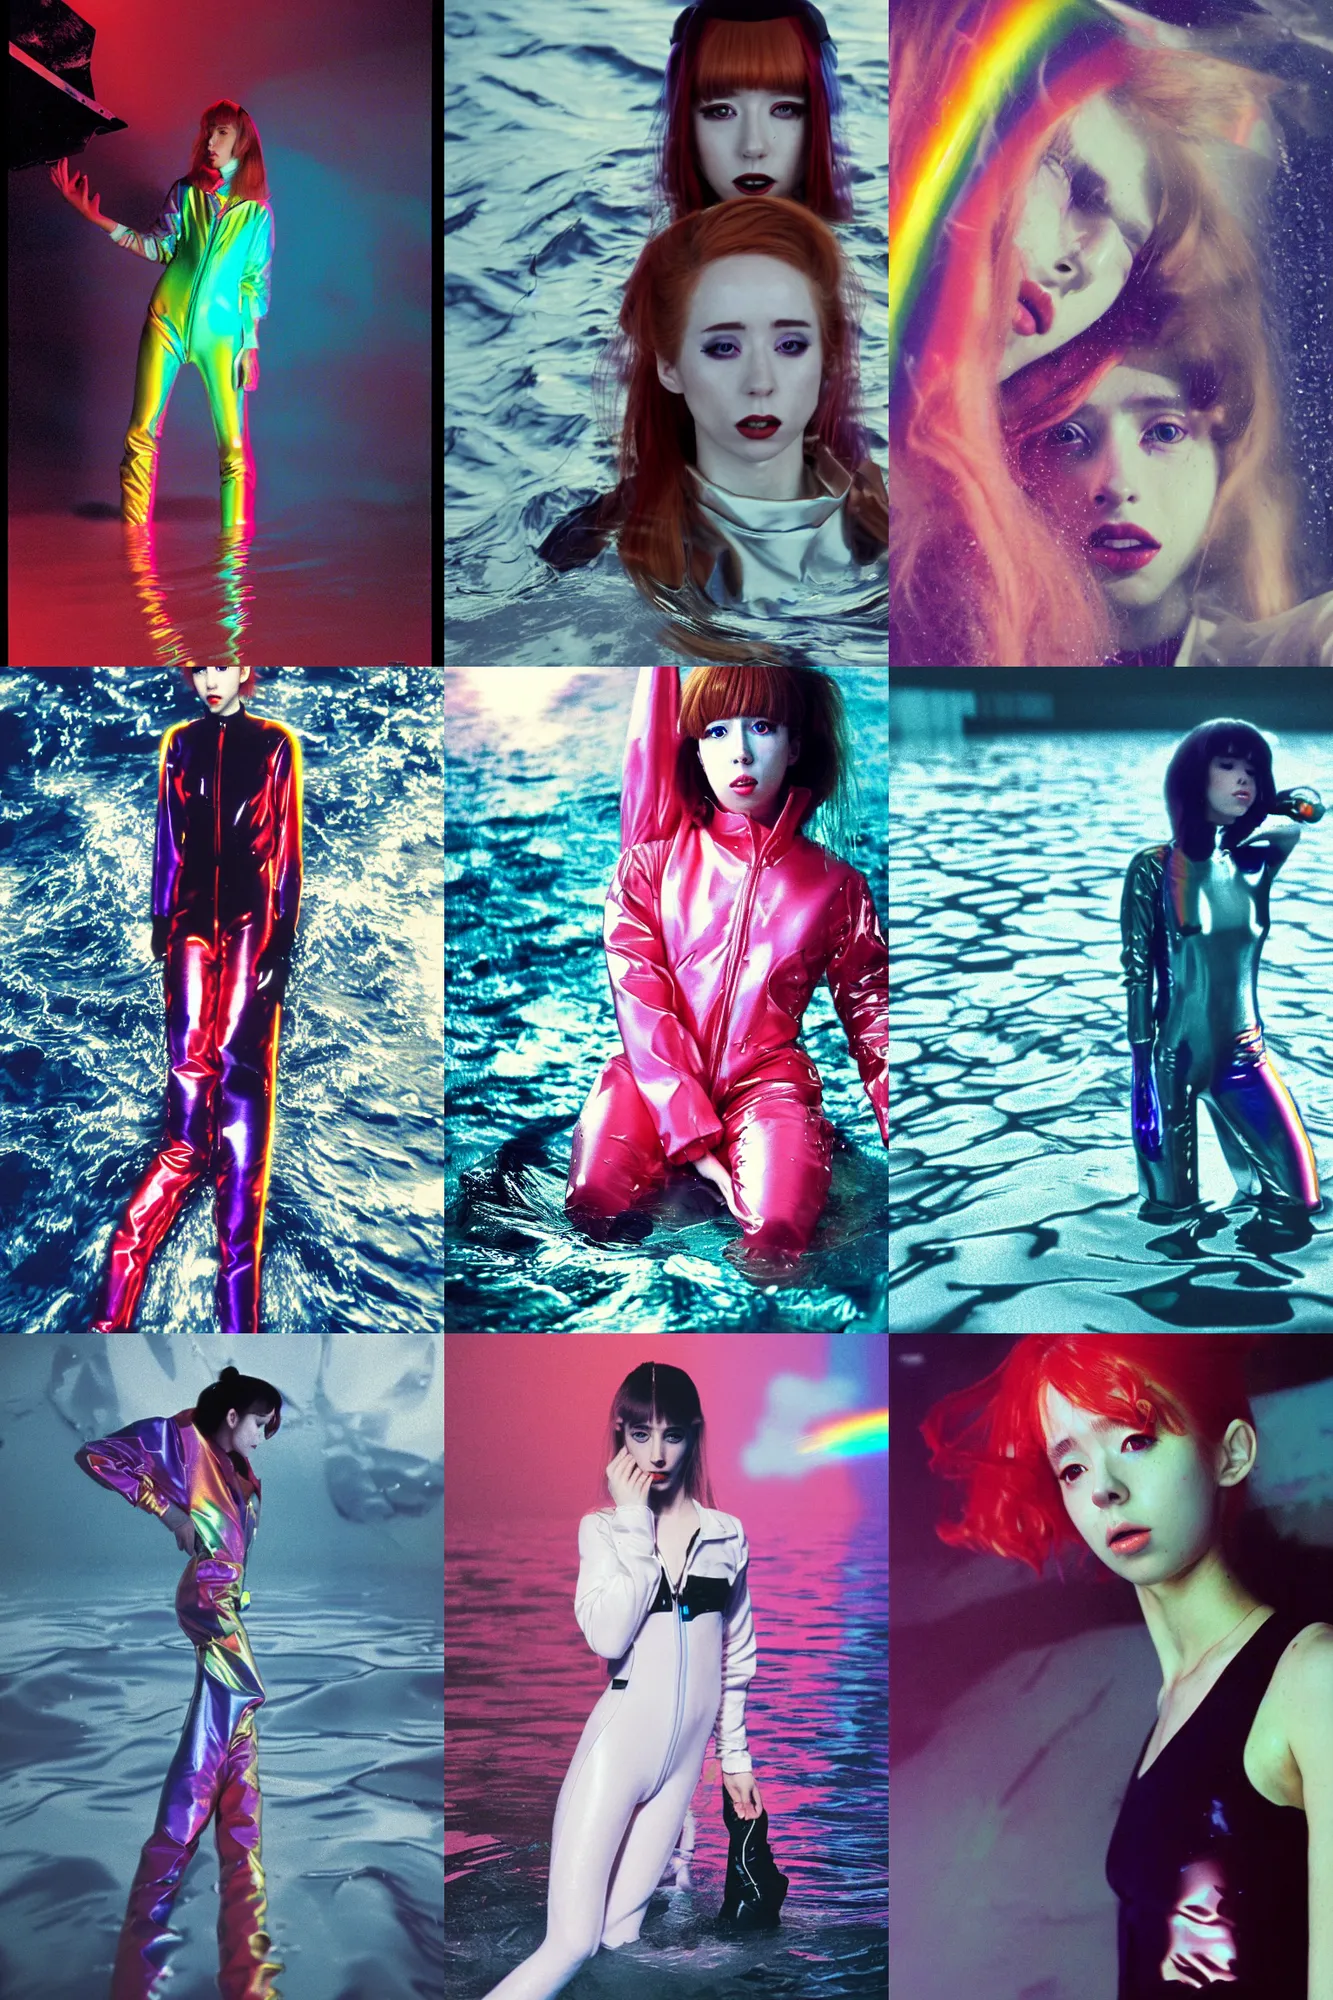 Prompt: Beautiful Holly Herndon style occult sketchbook seinen manga Fashion photography portrait tokyo top gun(1980) movie still from underwater space dance scene of model, wearing refracting rainbow diffusion wet plastic Balenciaga designed specular highlights anti-g flight jump suit, half submerged in heavy nighttime floods, water to waist, , épaule devant pose;pursed lips;athletic; pixie hair,eye contact, ultra realistic, Panavision Panaflex X , Technicolor, 8K, 35mm lens, three point perspective, tilt shift mirror kaleidoscope background, extreme closeup portrait, chiaroscuro, highly detailed, by moma, by Nabbteeri by Sergey Piskunov